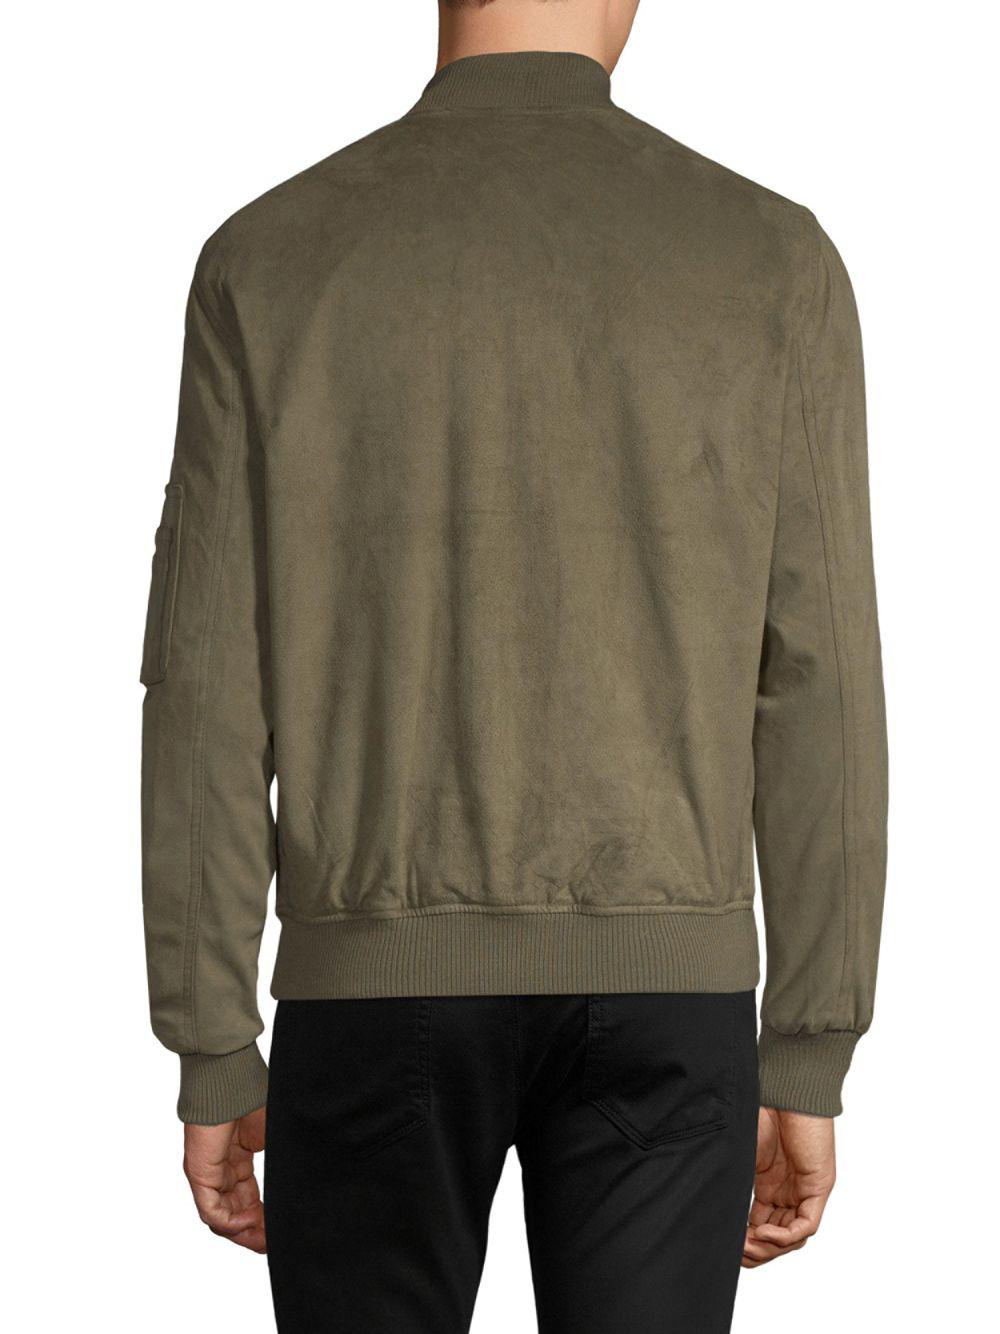 Slate & Stone Faux Suede Bomber Jacket in Olive (Green) for Men - Lyst